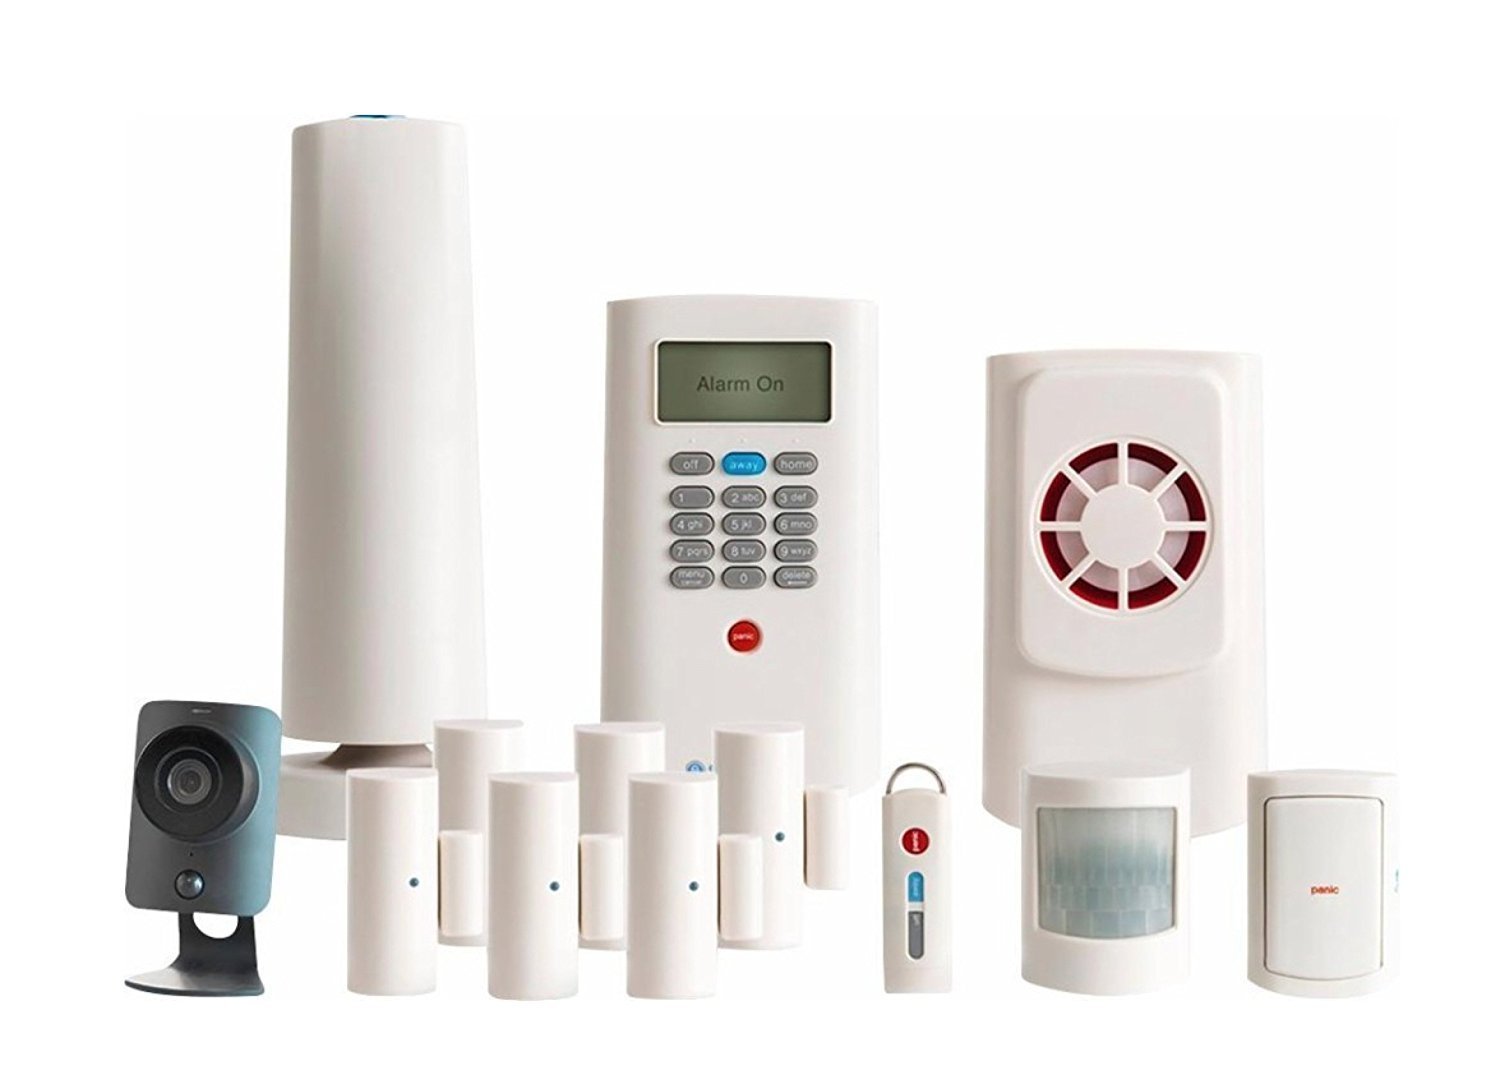 Today only: SimpliSafe Shield security system for $244